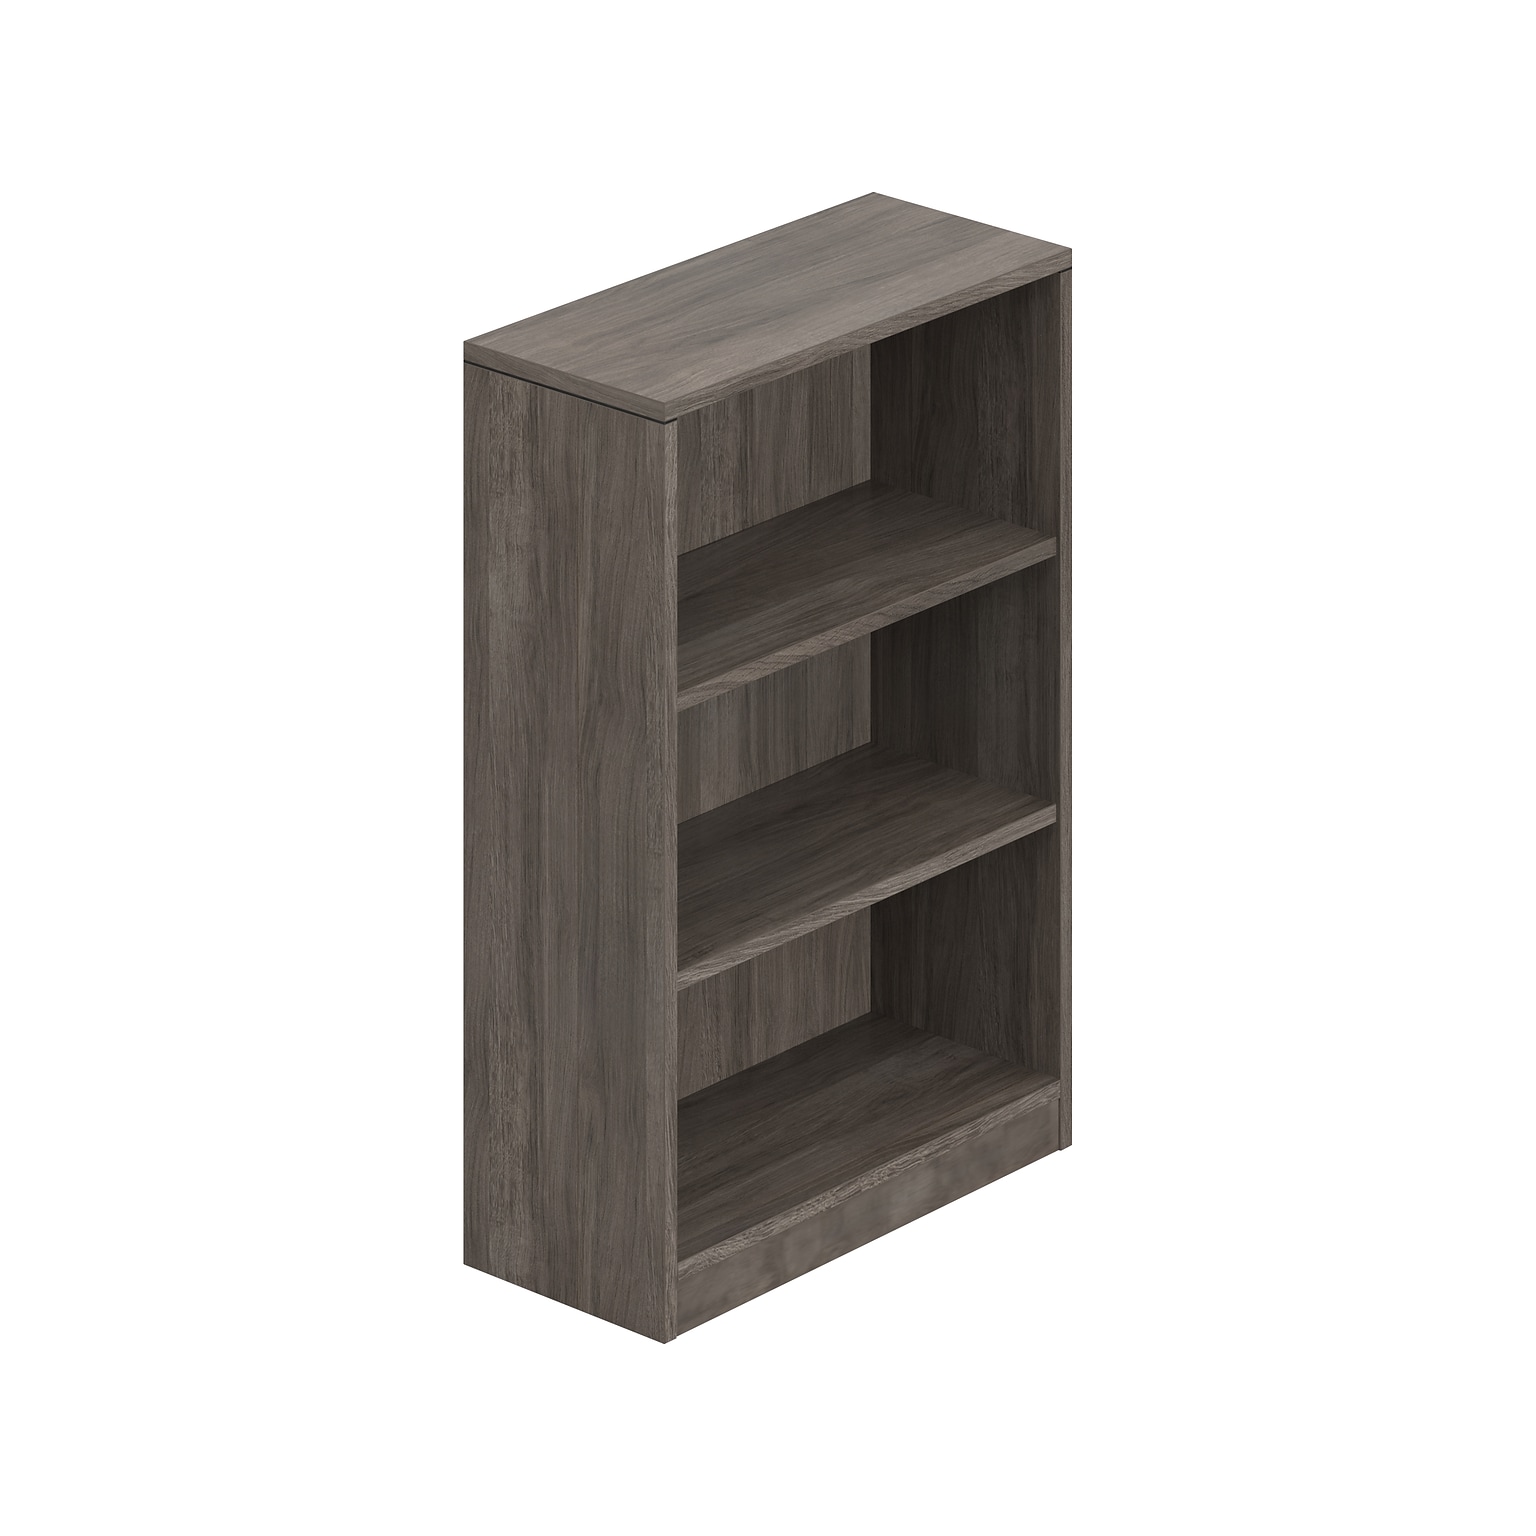 Offices to Go Superior Laminate 48H 2-Shelf Bookcase with Adjustable Shelves, Artisan Gray (TDSL48BCAGL)